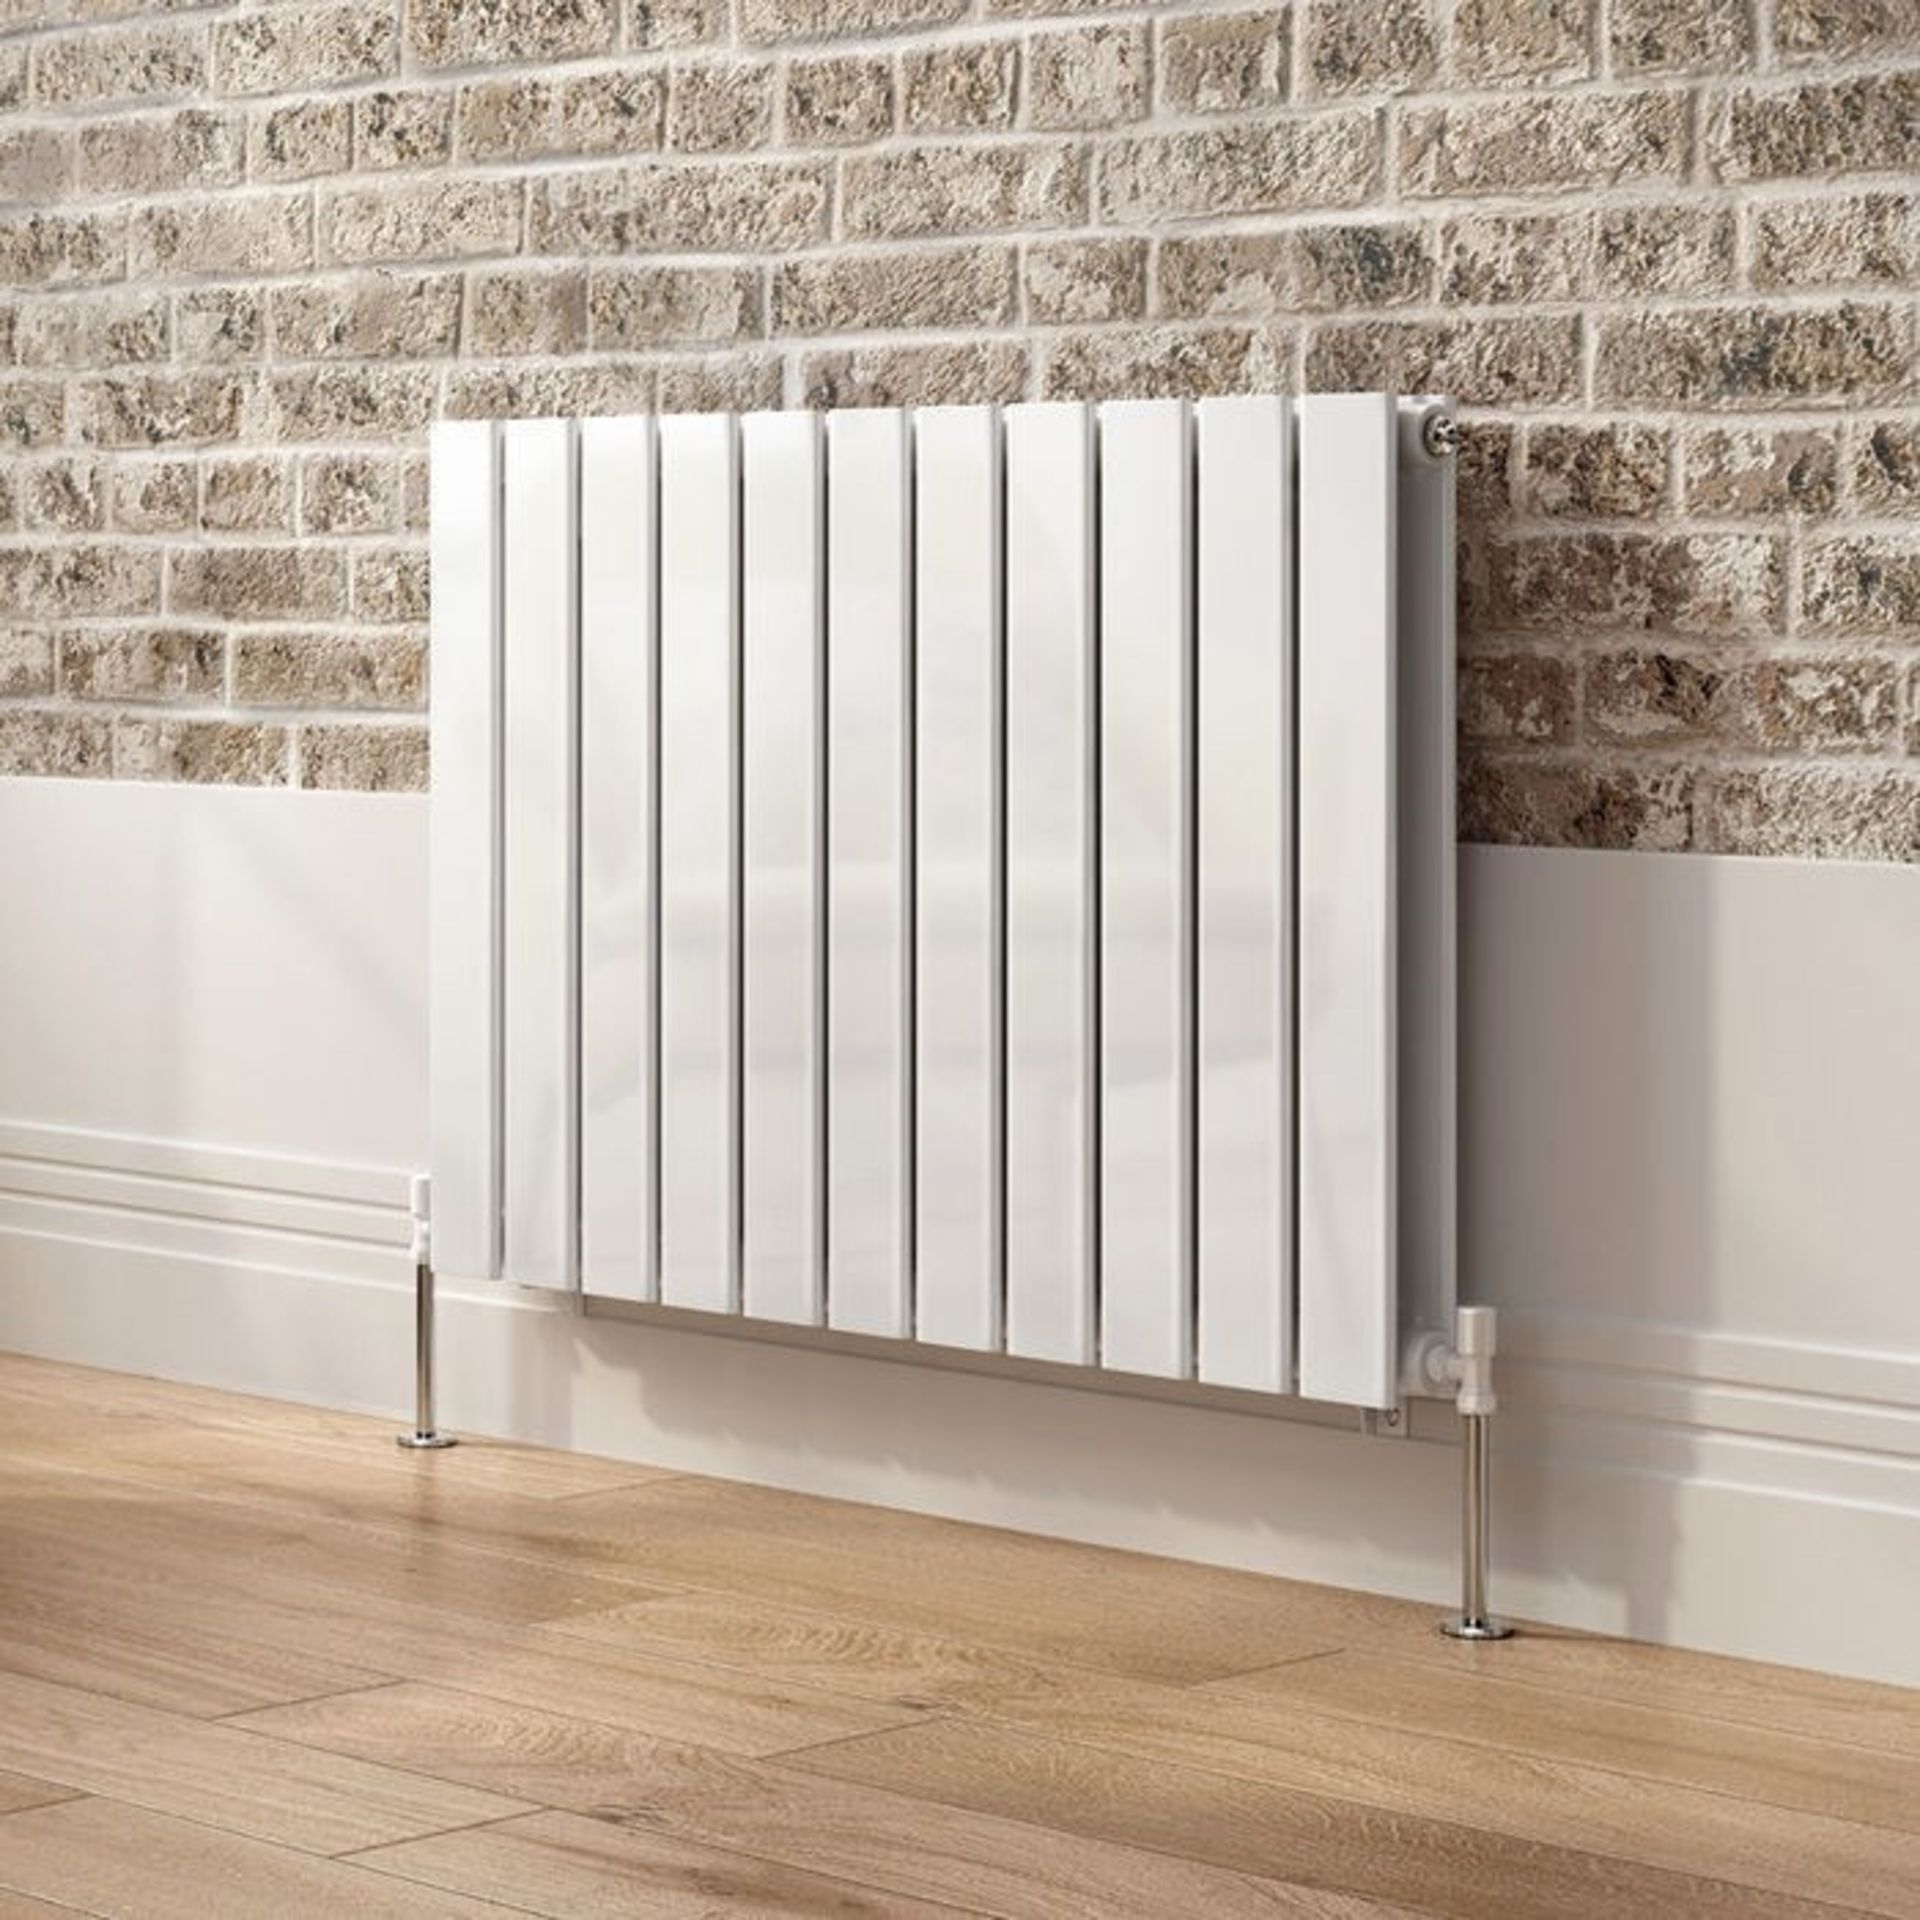 BRAND NEW BOXED 600x830mm Gloss White Double Flat Panel Horizontal Radiator. RRP £474.99.RC221. - Image 2 of 2